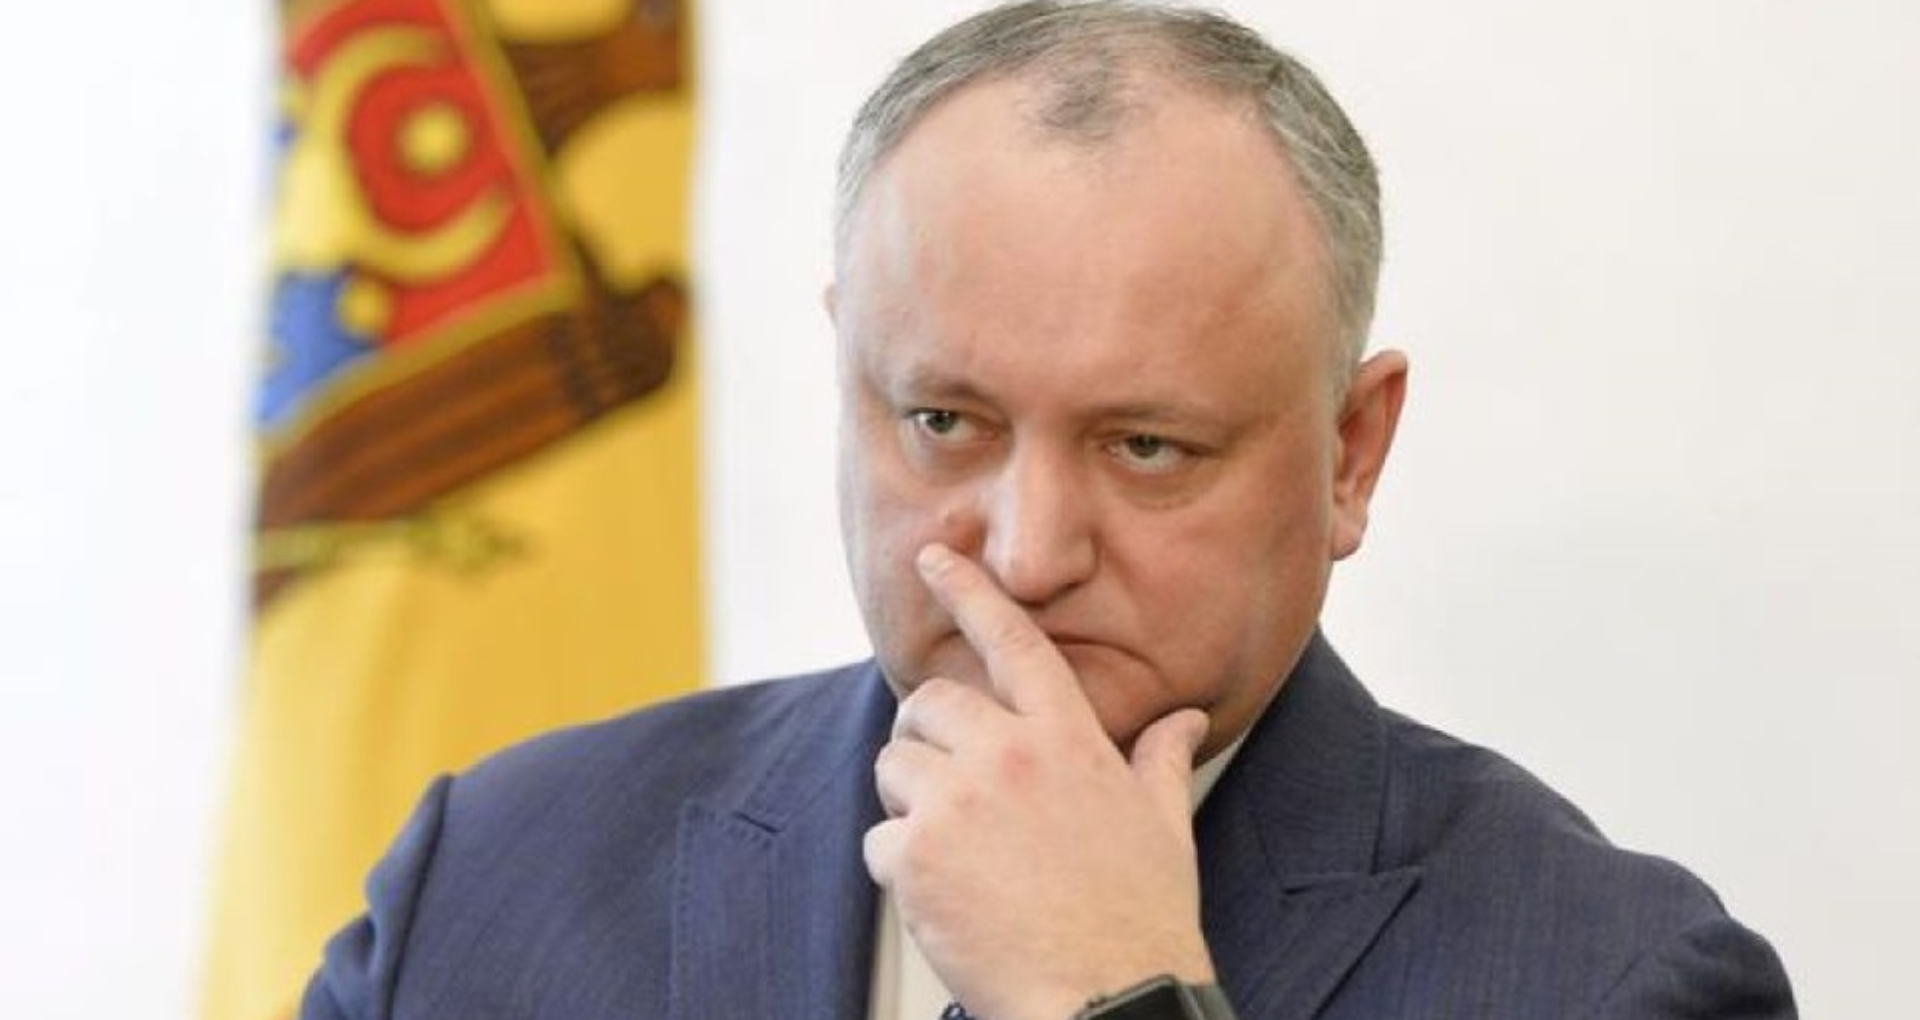 Former Moldovan Railways chief remains in prison. Chișinău judges rejected the appeal filed by his lawyers